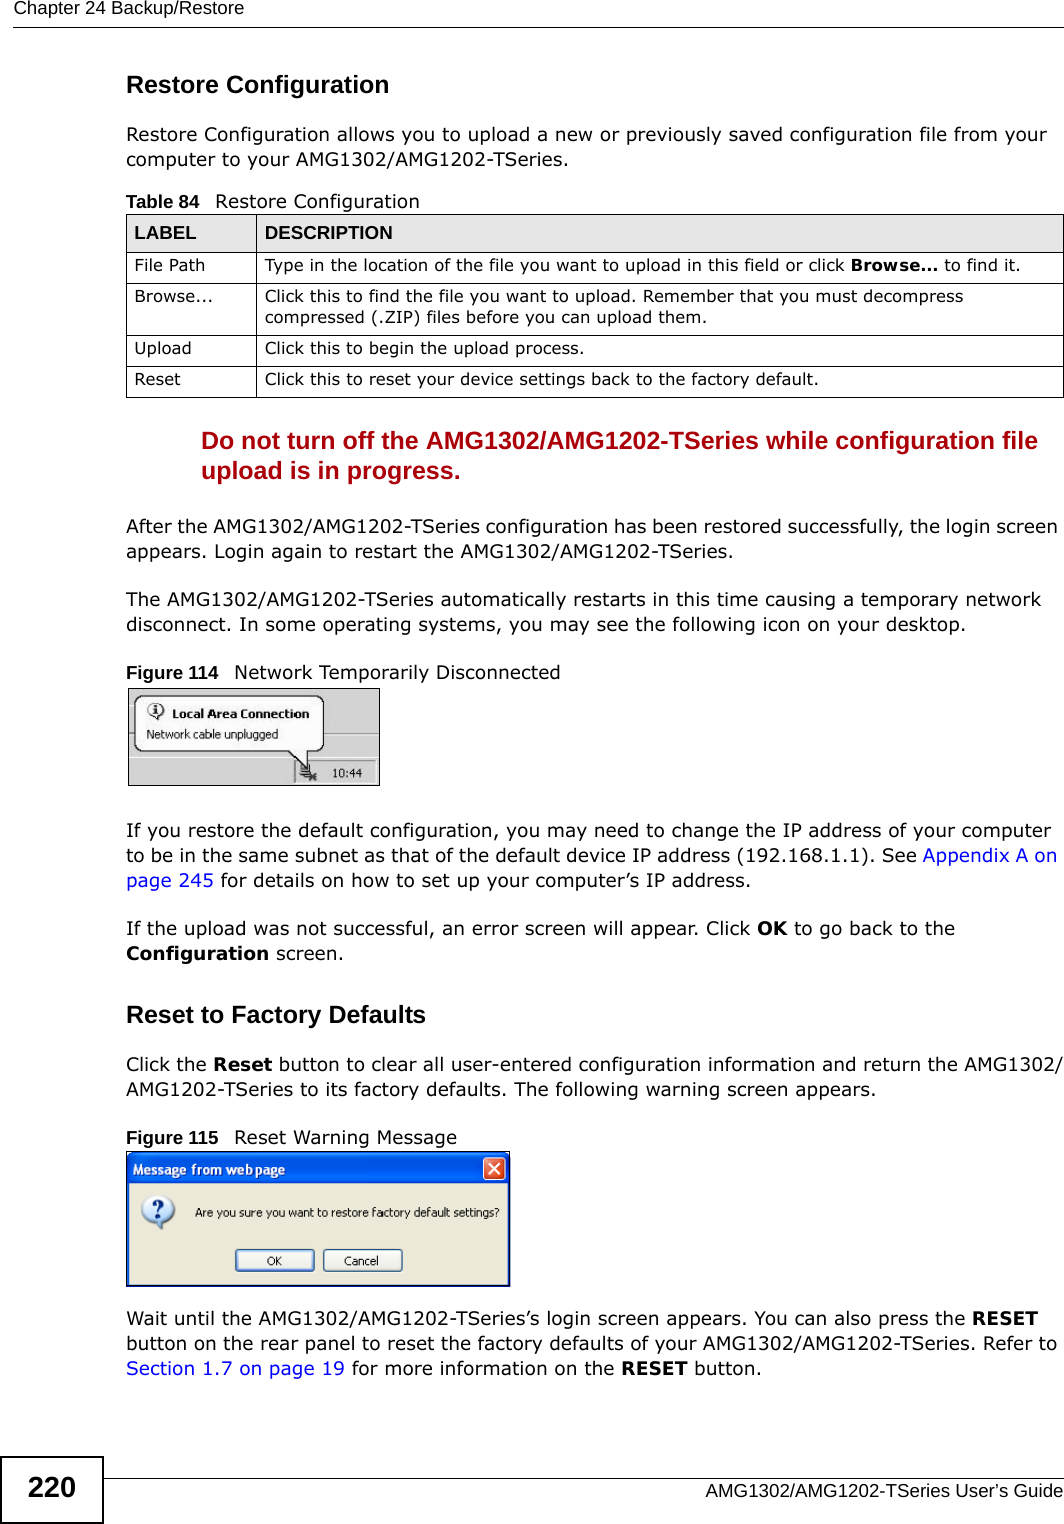 Chapter 24 Backup/RestoreAMG1302/AMG1202-TSeries User’s Guide220Restore Configuration Restore Configuration allows you to upload a new or previously saved configuration file from your computer to your AMG1302/AMG1202-TSeries.Do not turn off the AMG1302/AMG1202-TSeries while configuration file upload is in progress.After the AMG1302/AMG1202-TSeries configuration has been restored successfully, the login screen appears. Login again to restart the AMG1302/AMG1202-TSeries. The AMG1302/AMG1202-TSeries automatically restarts in this time causing a temporary network disconnect. In some operating systems, you may see the following icon on your desktop.Figure 114   Network Temporarily DisconnectedIf you restore the default configuration, you may need to change the IP address of your computer to be in the same subnet as that of the default device IP address (192.168.1.1). See Appendix A on page 245 for details on how to set up your computer’s IP address.If the upload was not successful, an error screen will appear. Click OK to go back to the Configuration screen. Reset to Factory Defaults  Click the Reset button to clear all user-entered configuration information and return the AMG1302/AMG1202-TSeries to its factory defaults. The following warning screen appears.Figure 115   Reset Warning MessageWait until the AMG1302/AMG1202-TSeries’s login screen appears. You can also press the RESET button on the rear panel to reset the factory defaults of your AMG1302/AMG1202-TSeries. Refer to Section 1.7 on page 19 for more information on the RESET button.Table 84   Restore ConfigurationLABEL DESCRIPTIONFile Path  Type in the location of the file you want to upload in this field or click Browse... to find it.Browse...  Click this to find the file you want to upload. Remember that you must decompress compressed (.ZIP) files before you can upload them. Upload  Click this to begin the upload process.Reset Click this to reset your device settings back to the factory default.